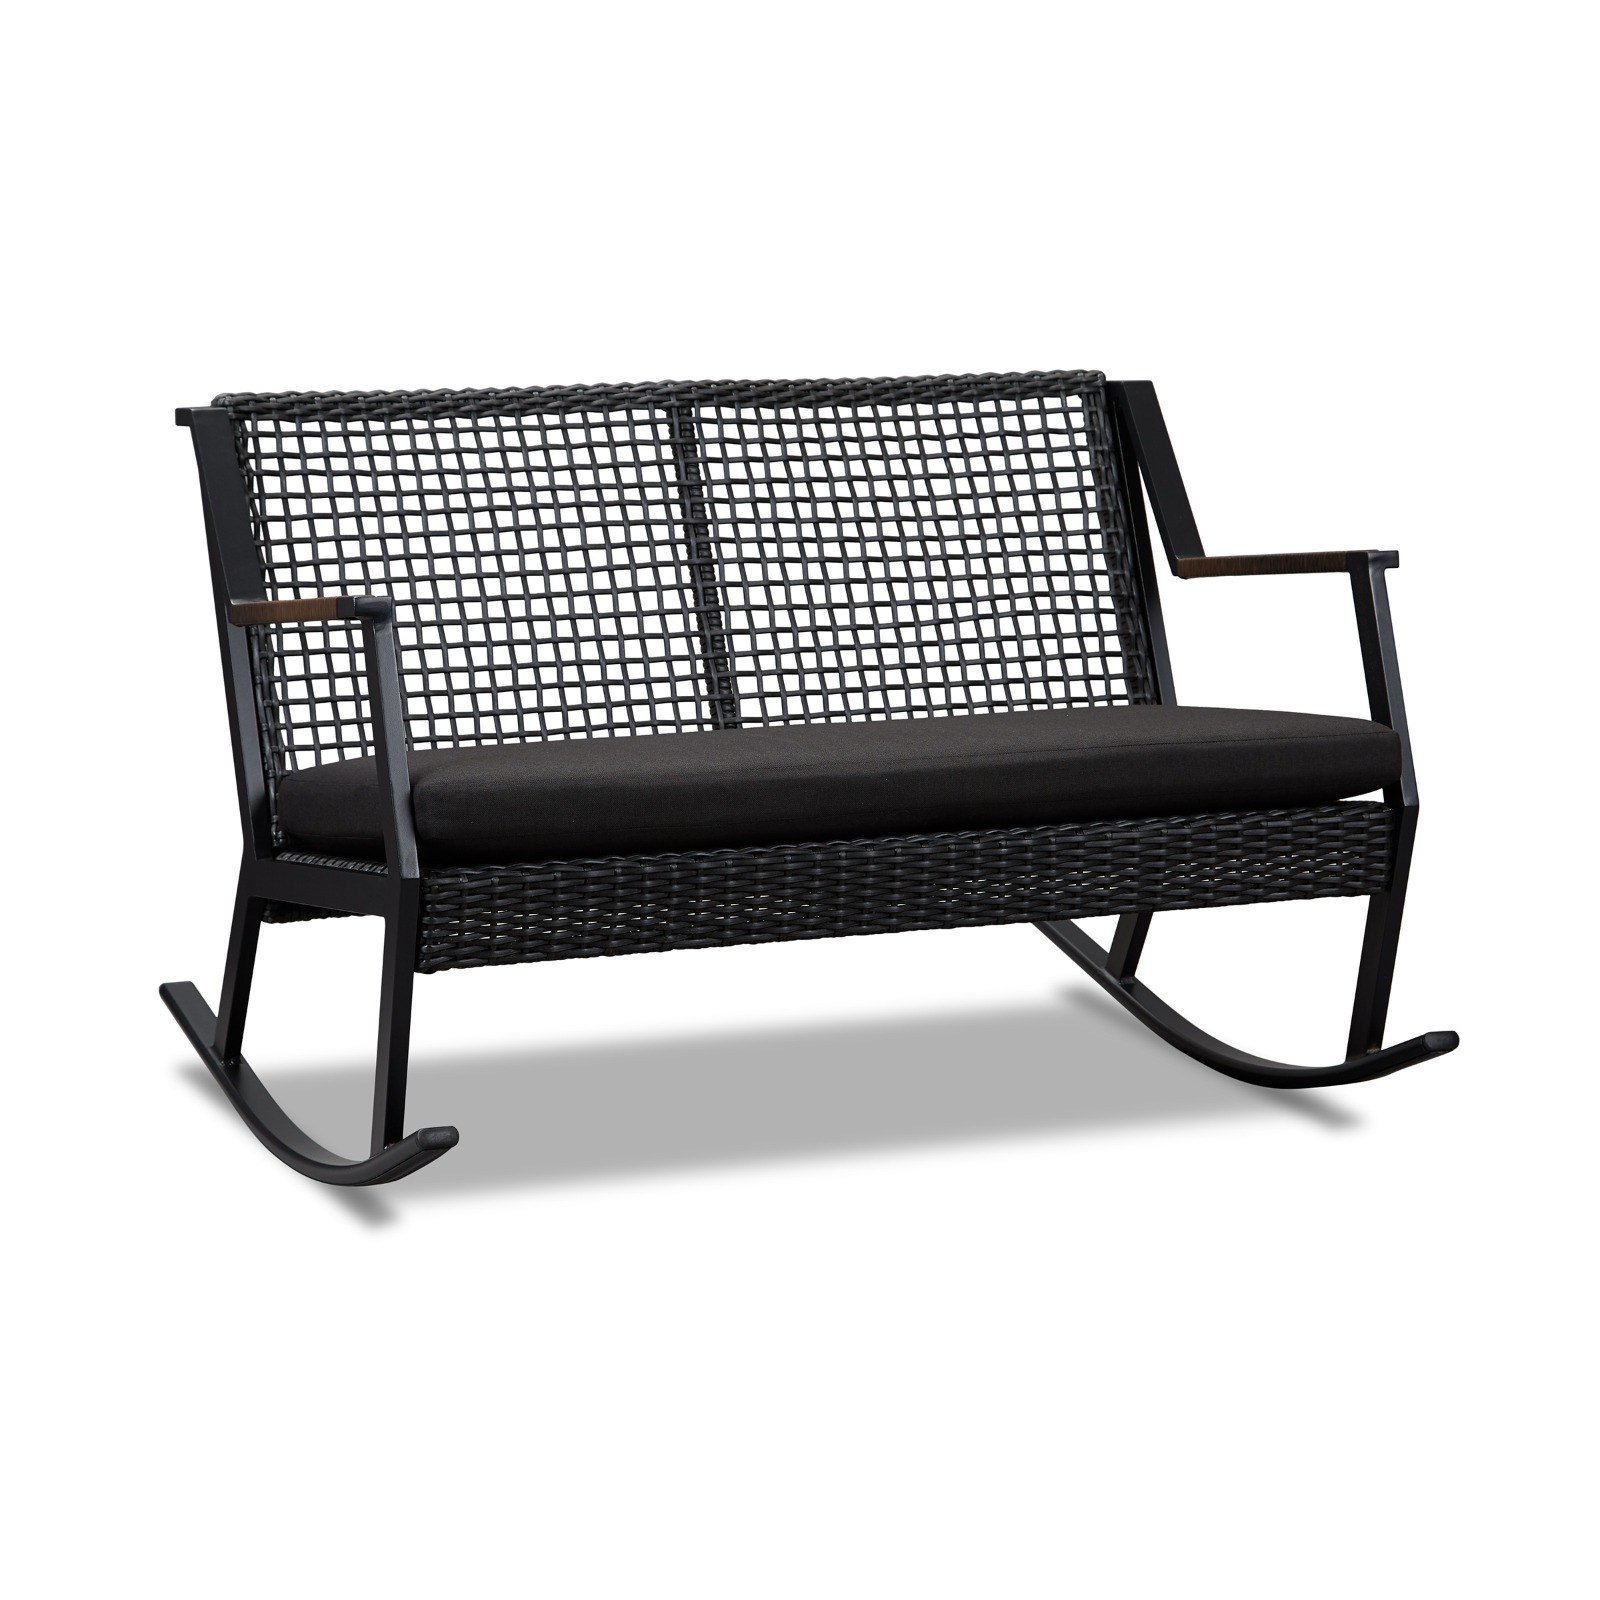 Calvin Outdoor Loveseat Patio Loveseat Outdoor Two Seat Bench Rocking Chair Two Seat Rocker Patio Furniture